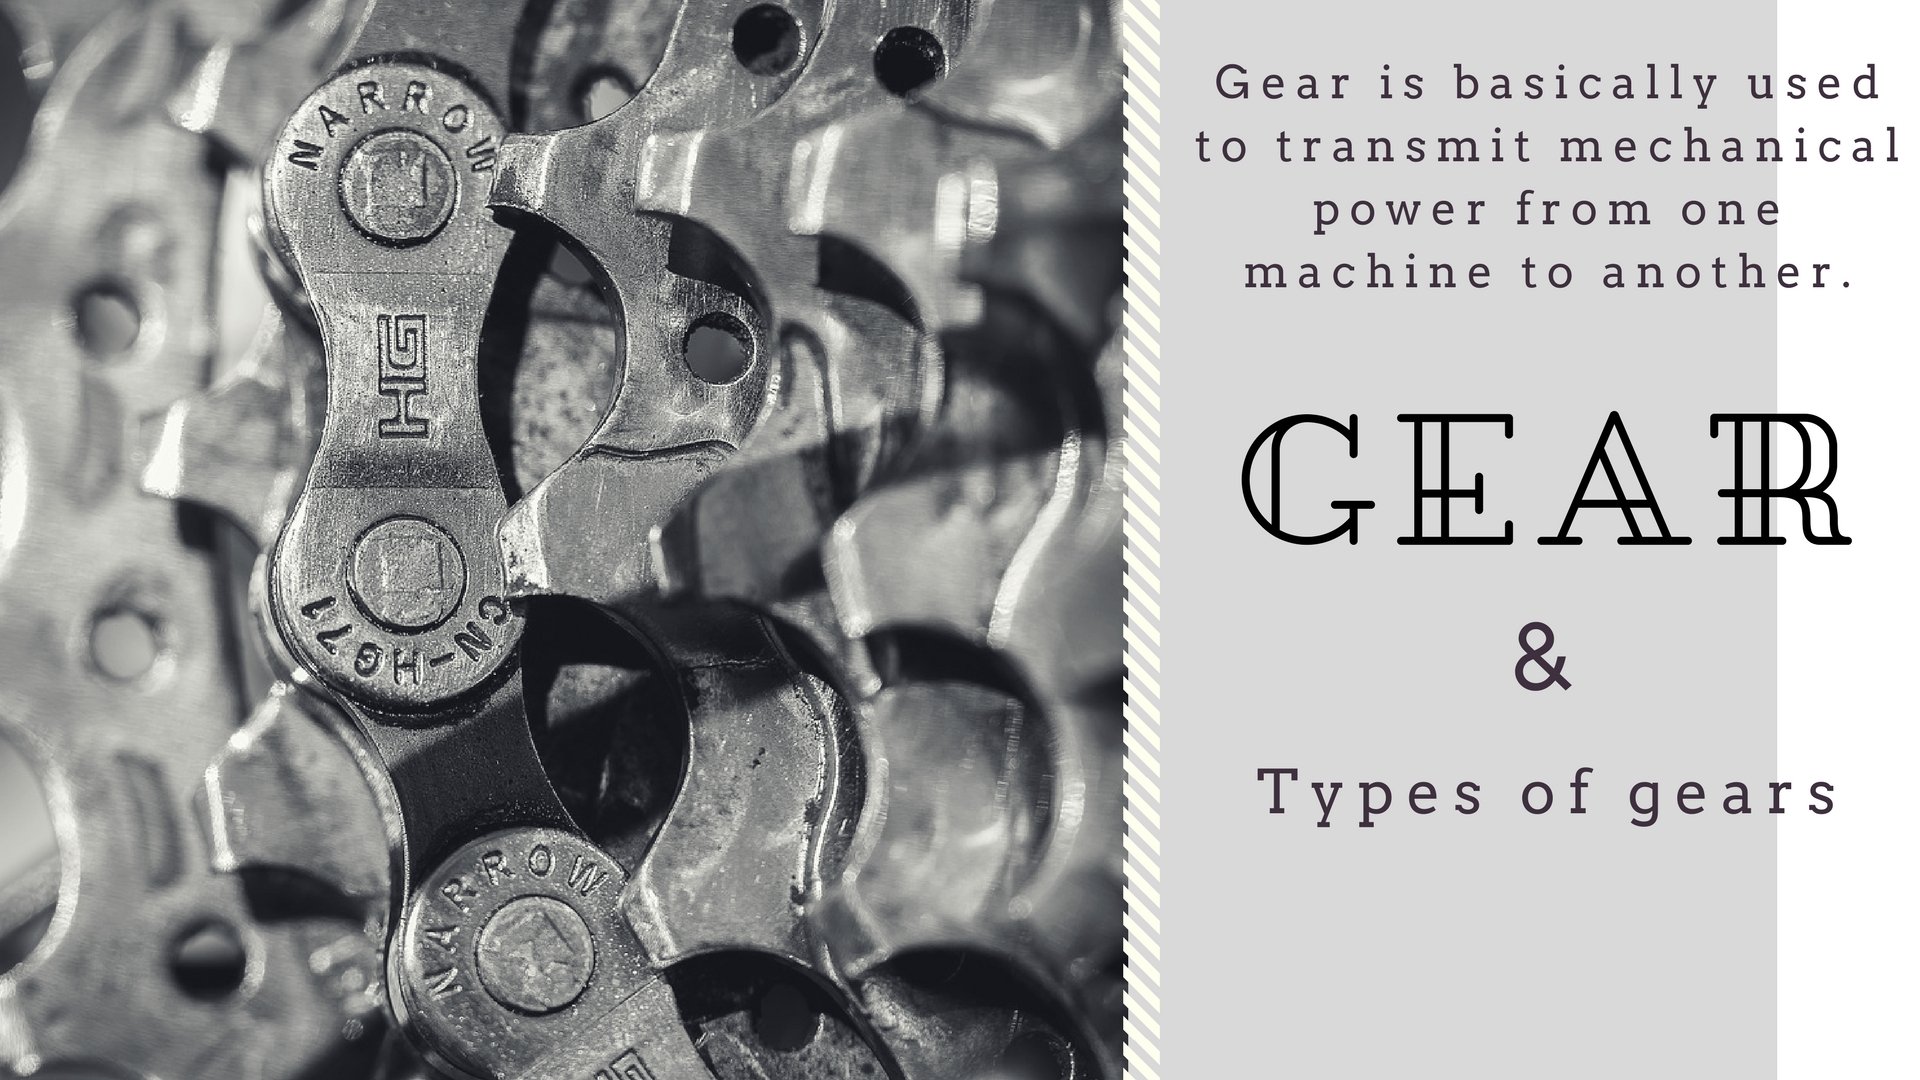 types-of-gears-classification-of-gears-types-of-gear-trains